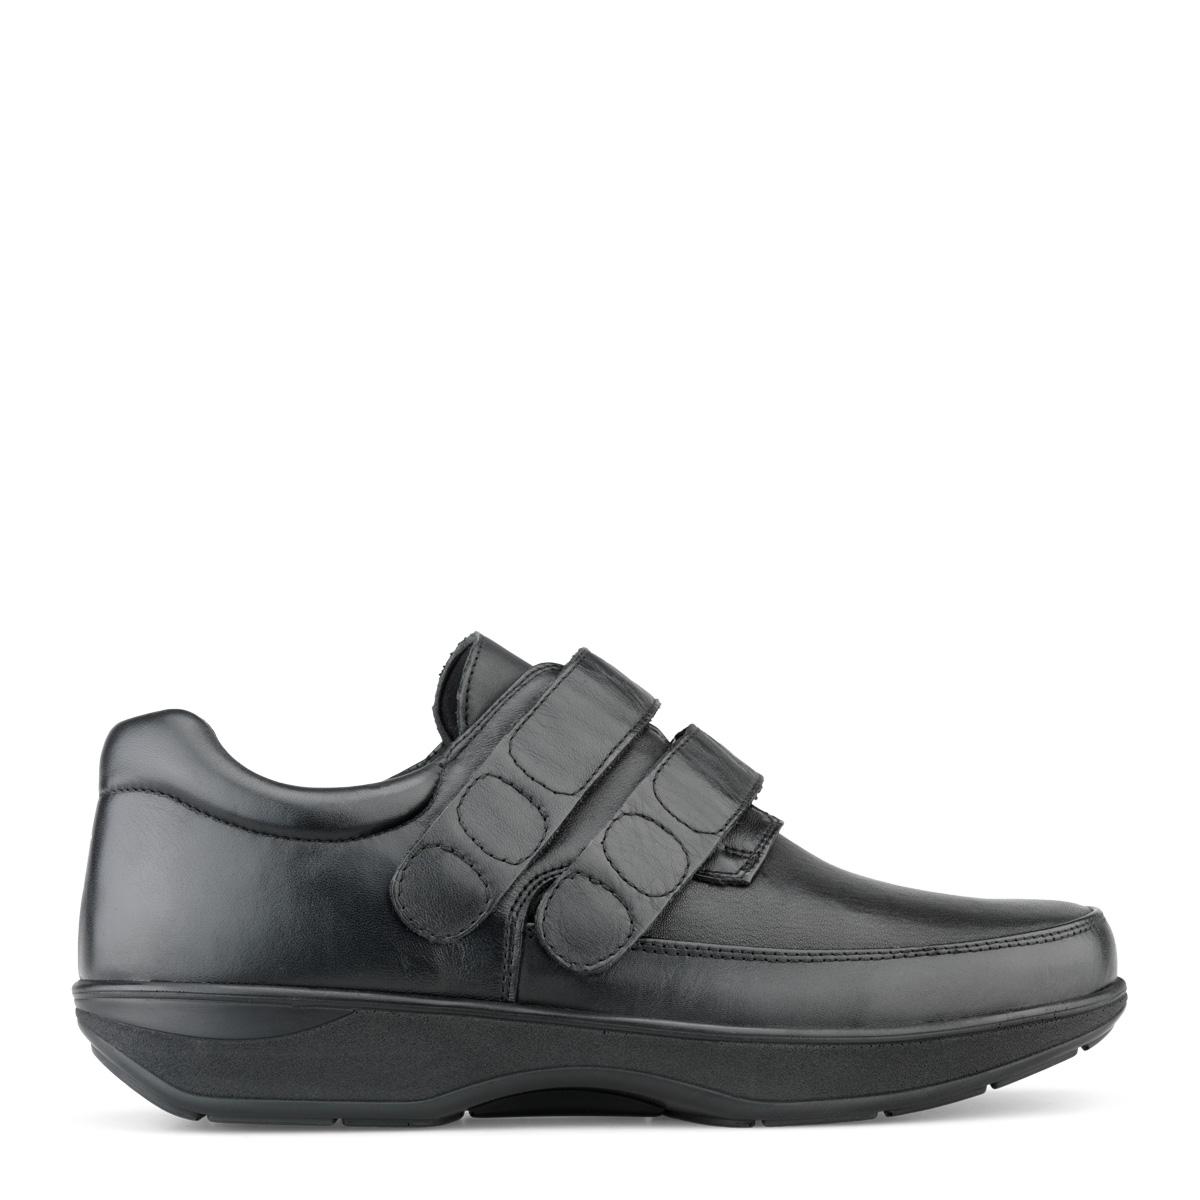 Mens shoe with double velcro